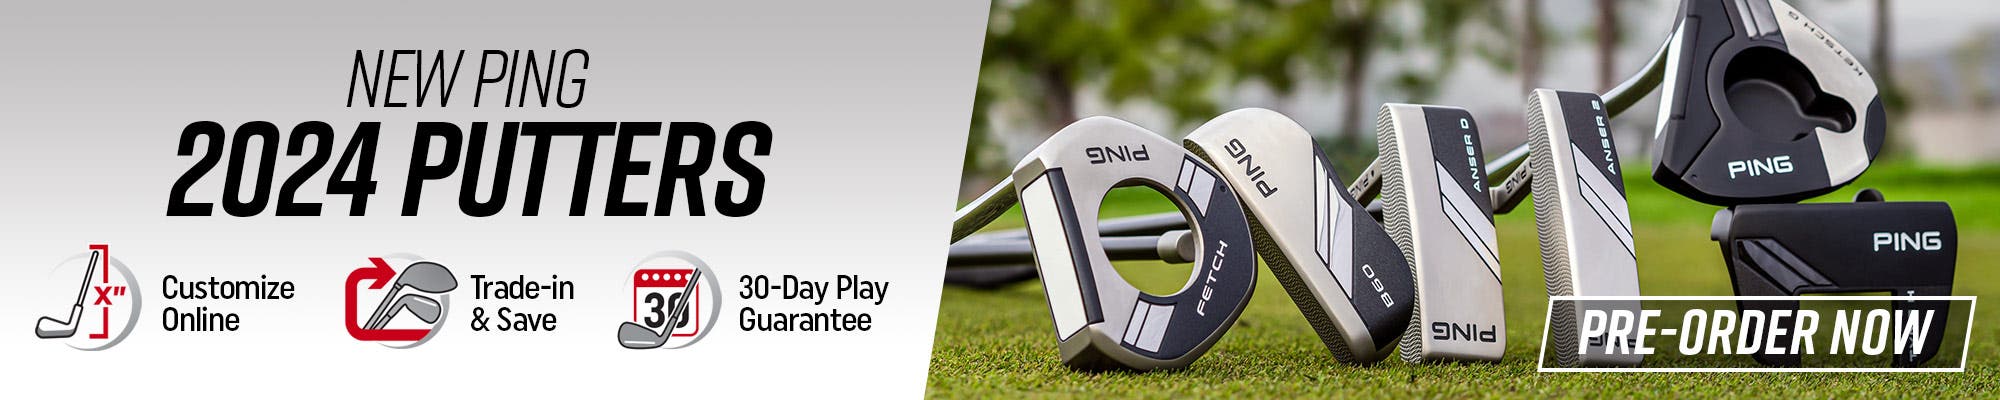 New Ping 2024 Putters | Pre-Order Now